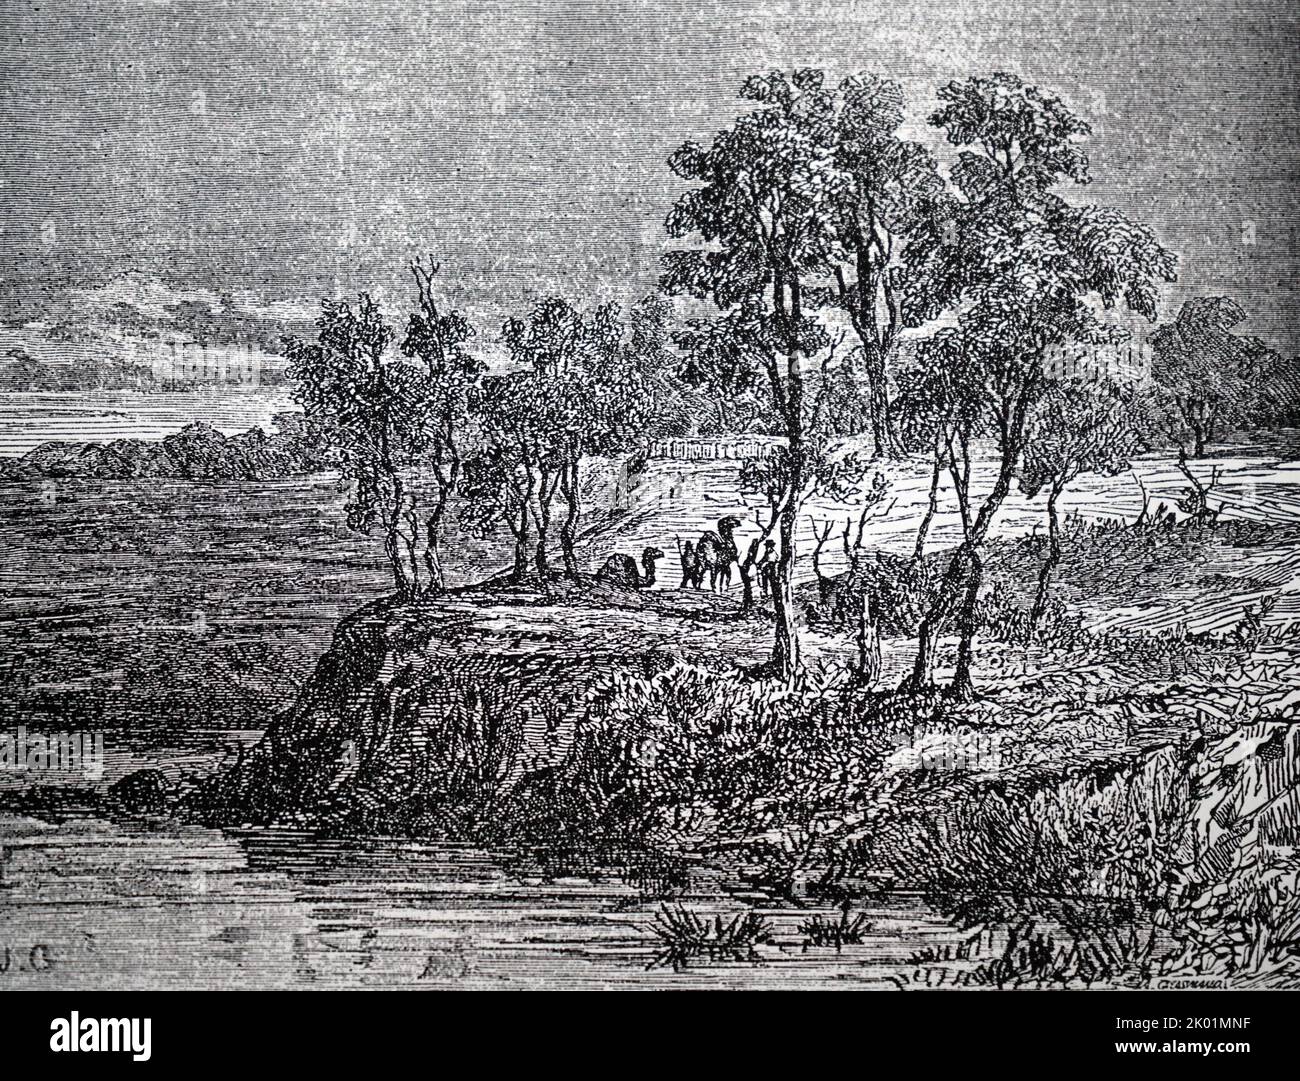 Burke and Wills Expedition 1860-61. Cooper's Creek where Burke and Wills died in 1861. Stock Photo